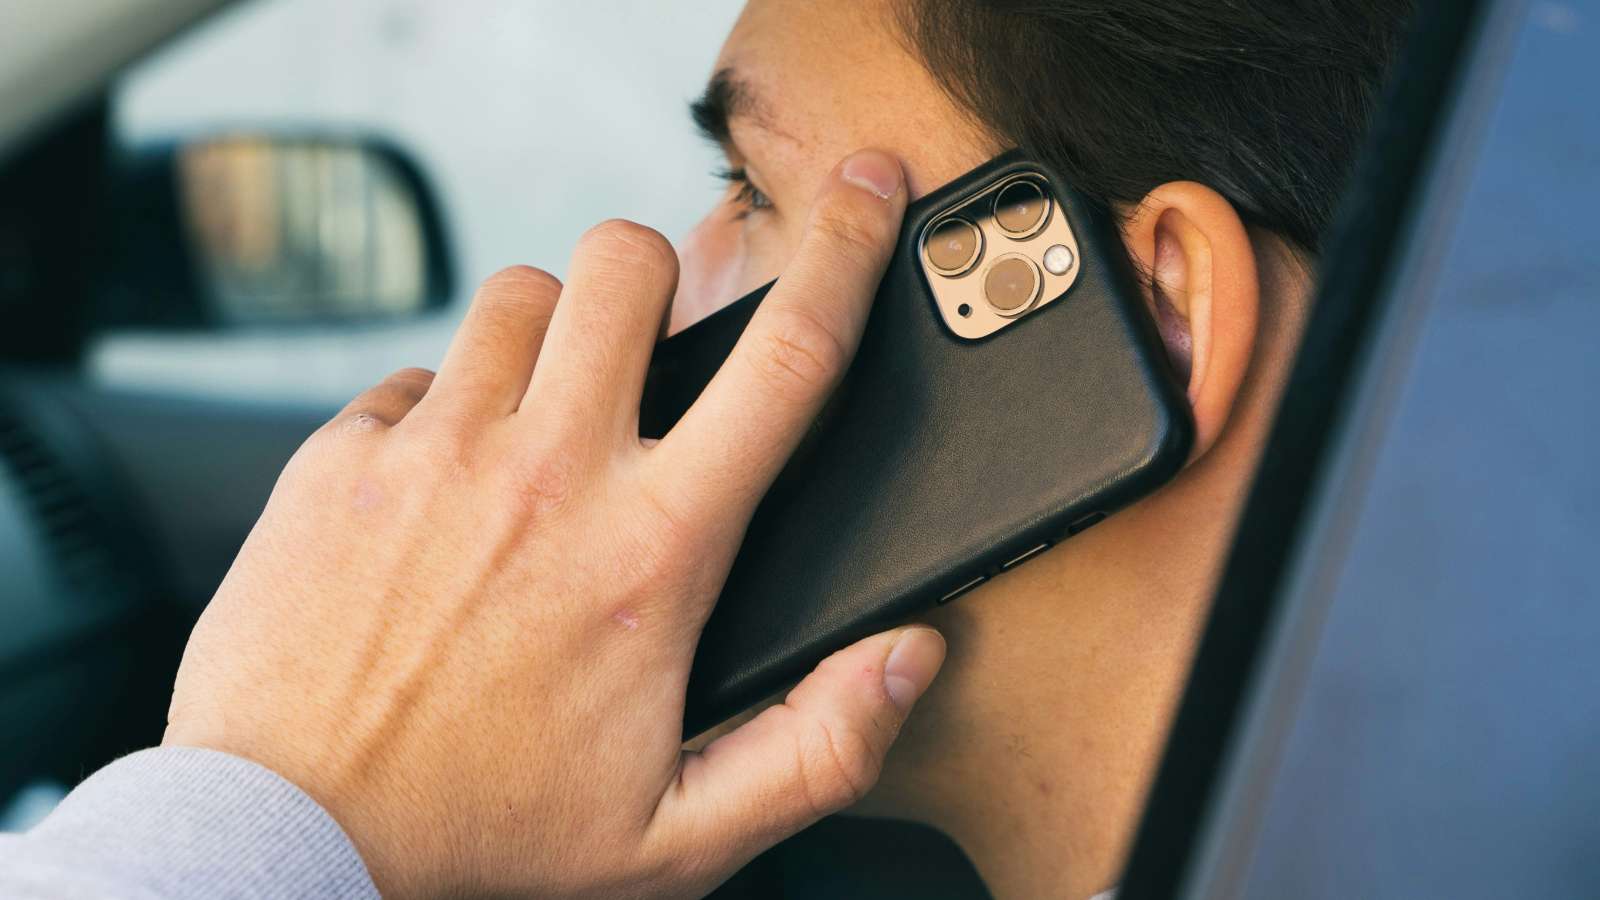 A person calling on an iPhone